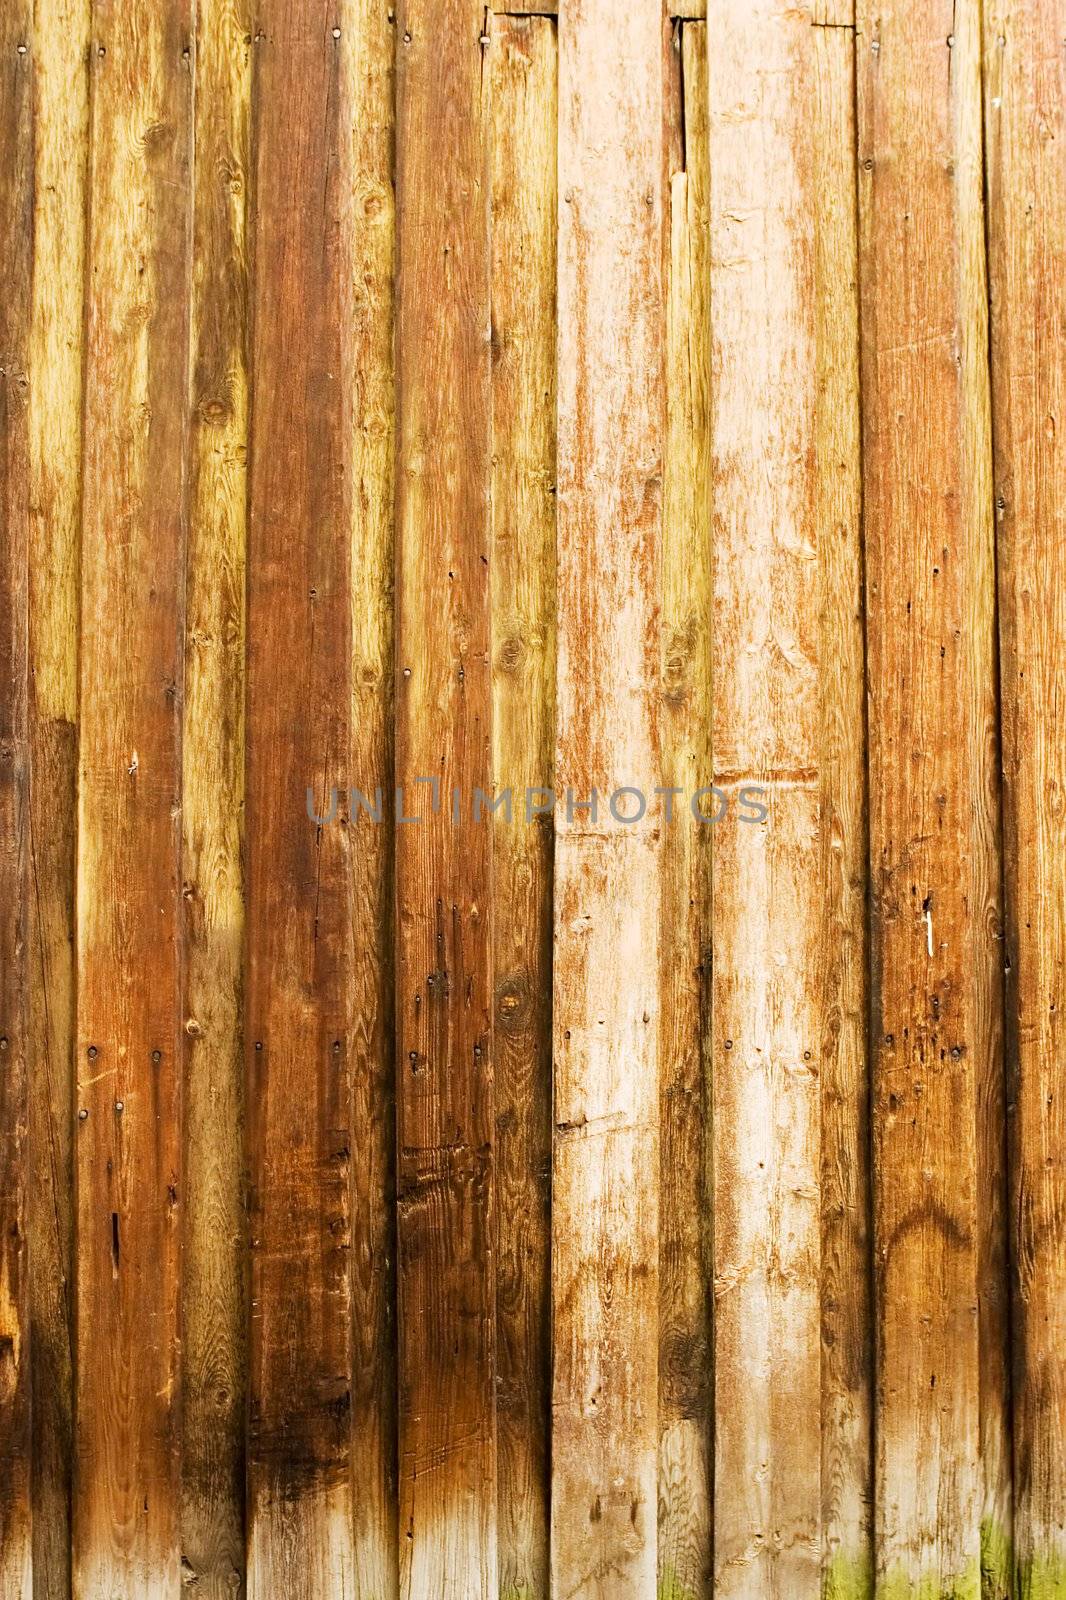 Wood Texture by leaf